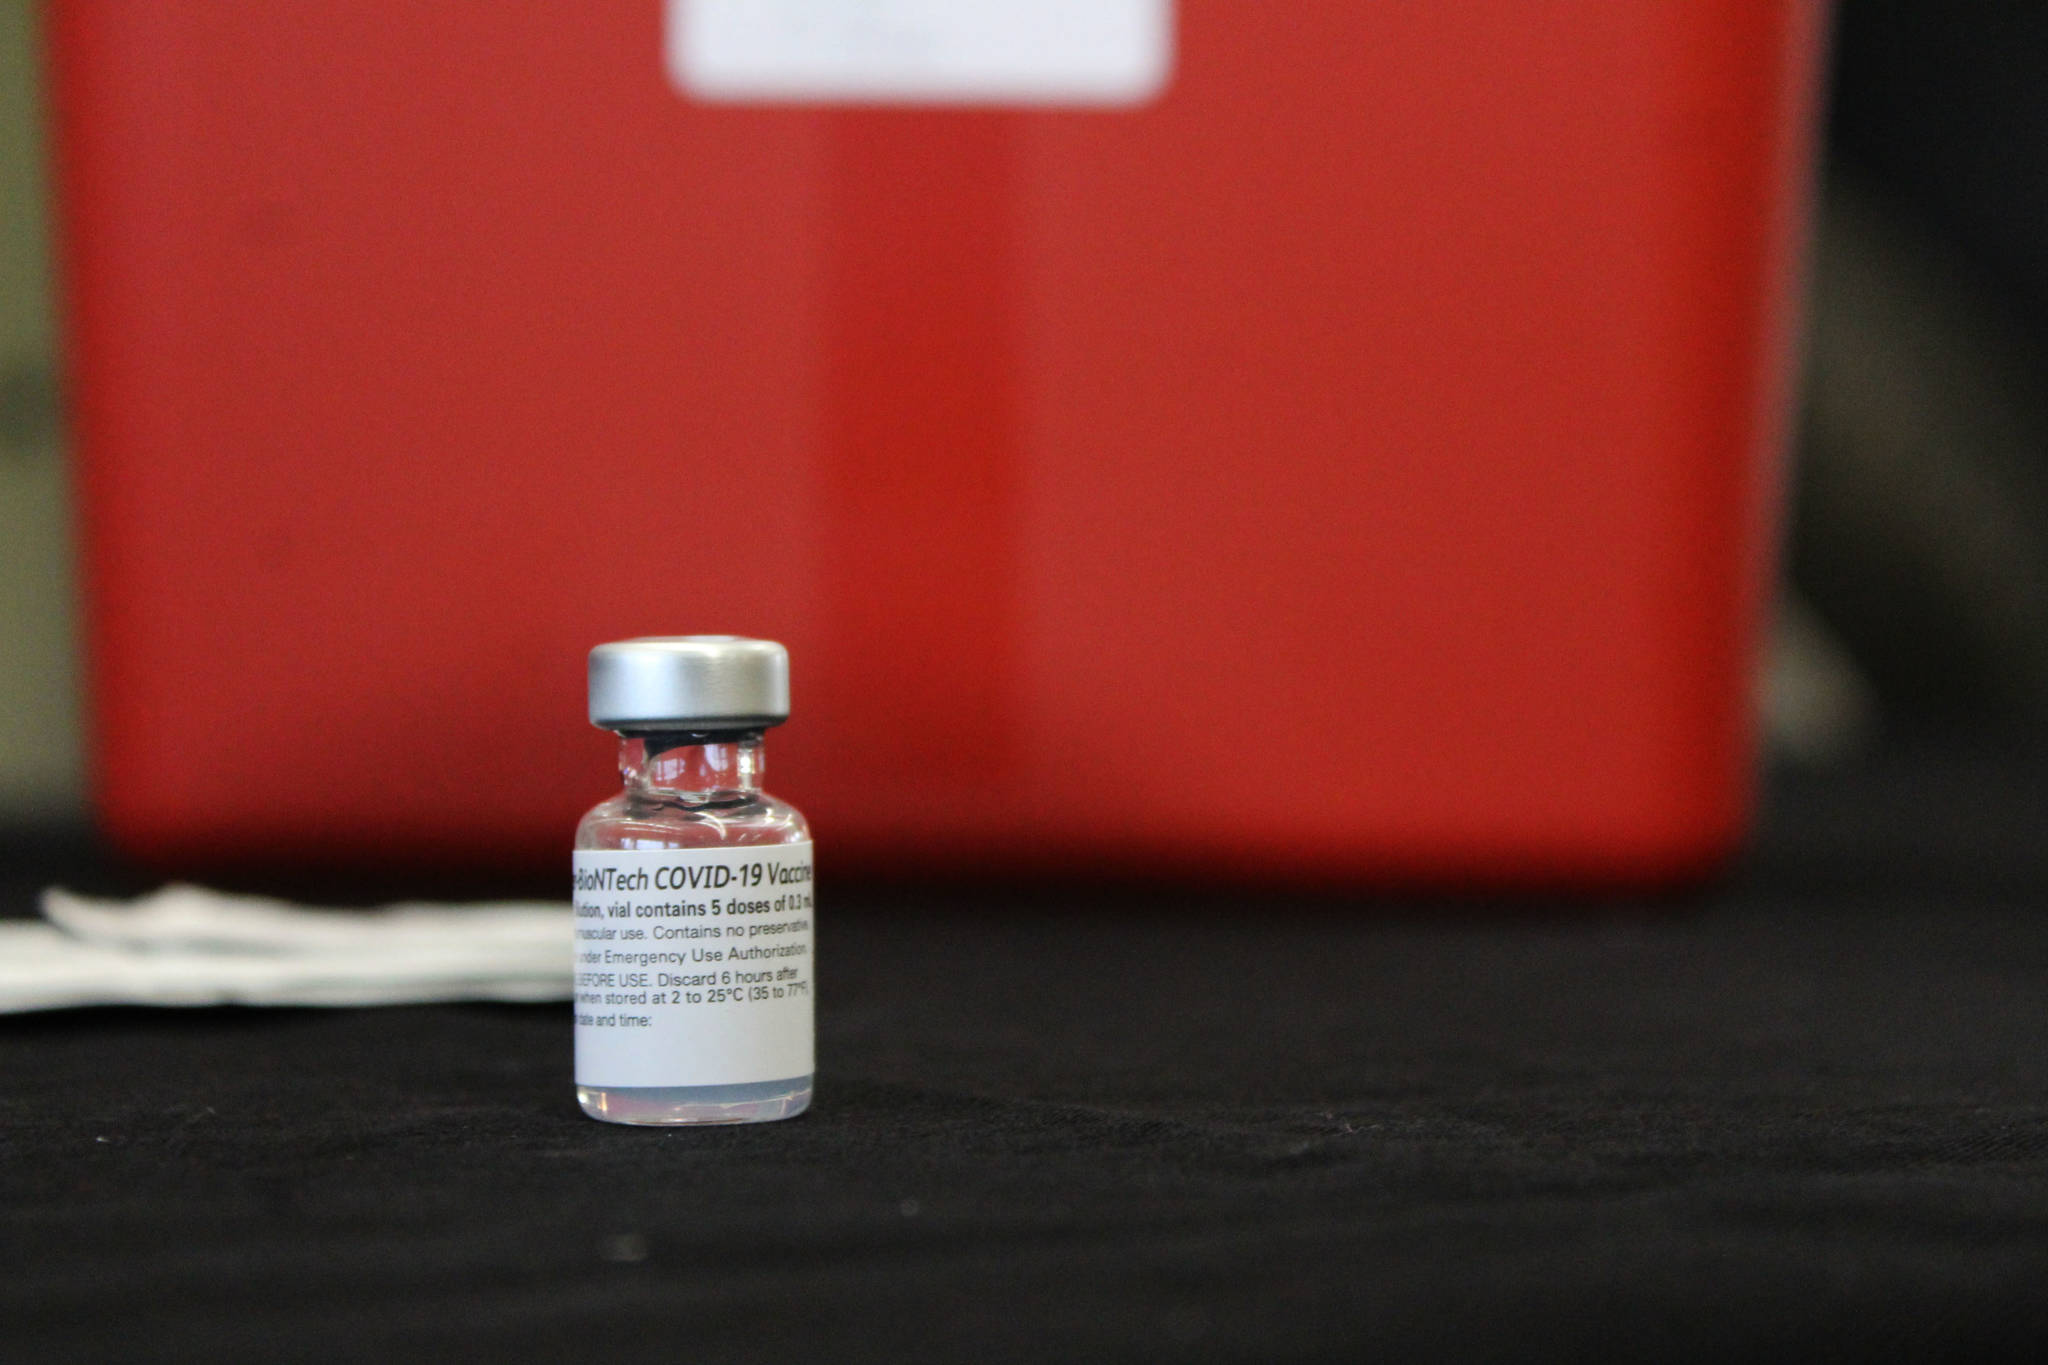 A vial of Pfizer's COVID-19 vaccine is seen at Central Emergency Services Station 1 on Friday, Dec. 18 in Soldotna, Alaska. (Ashlyn O'Hara/Peninsula Clarion)